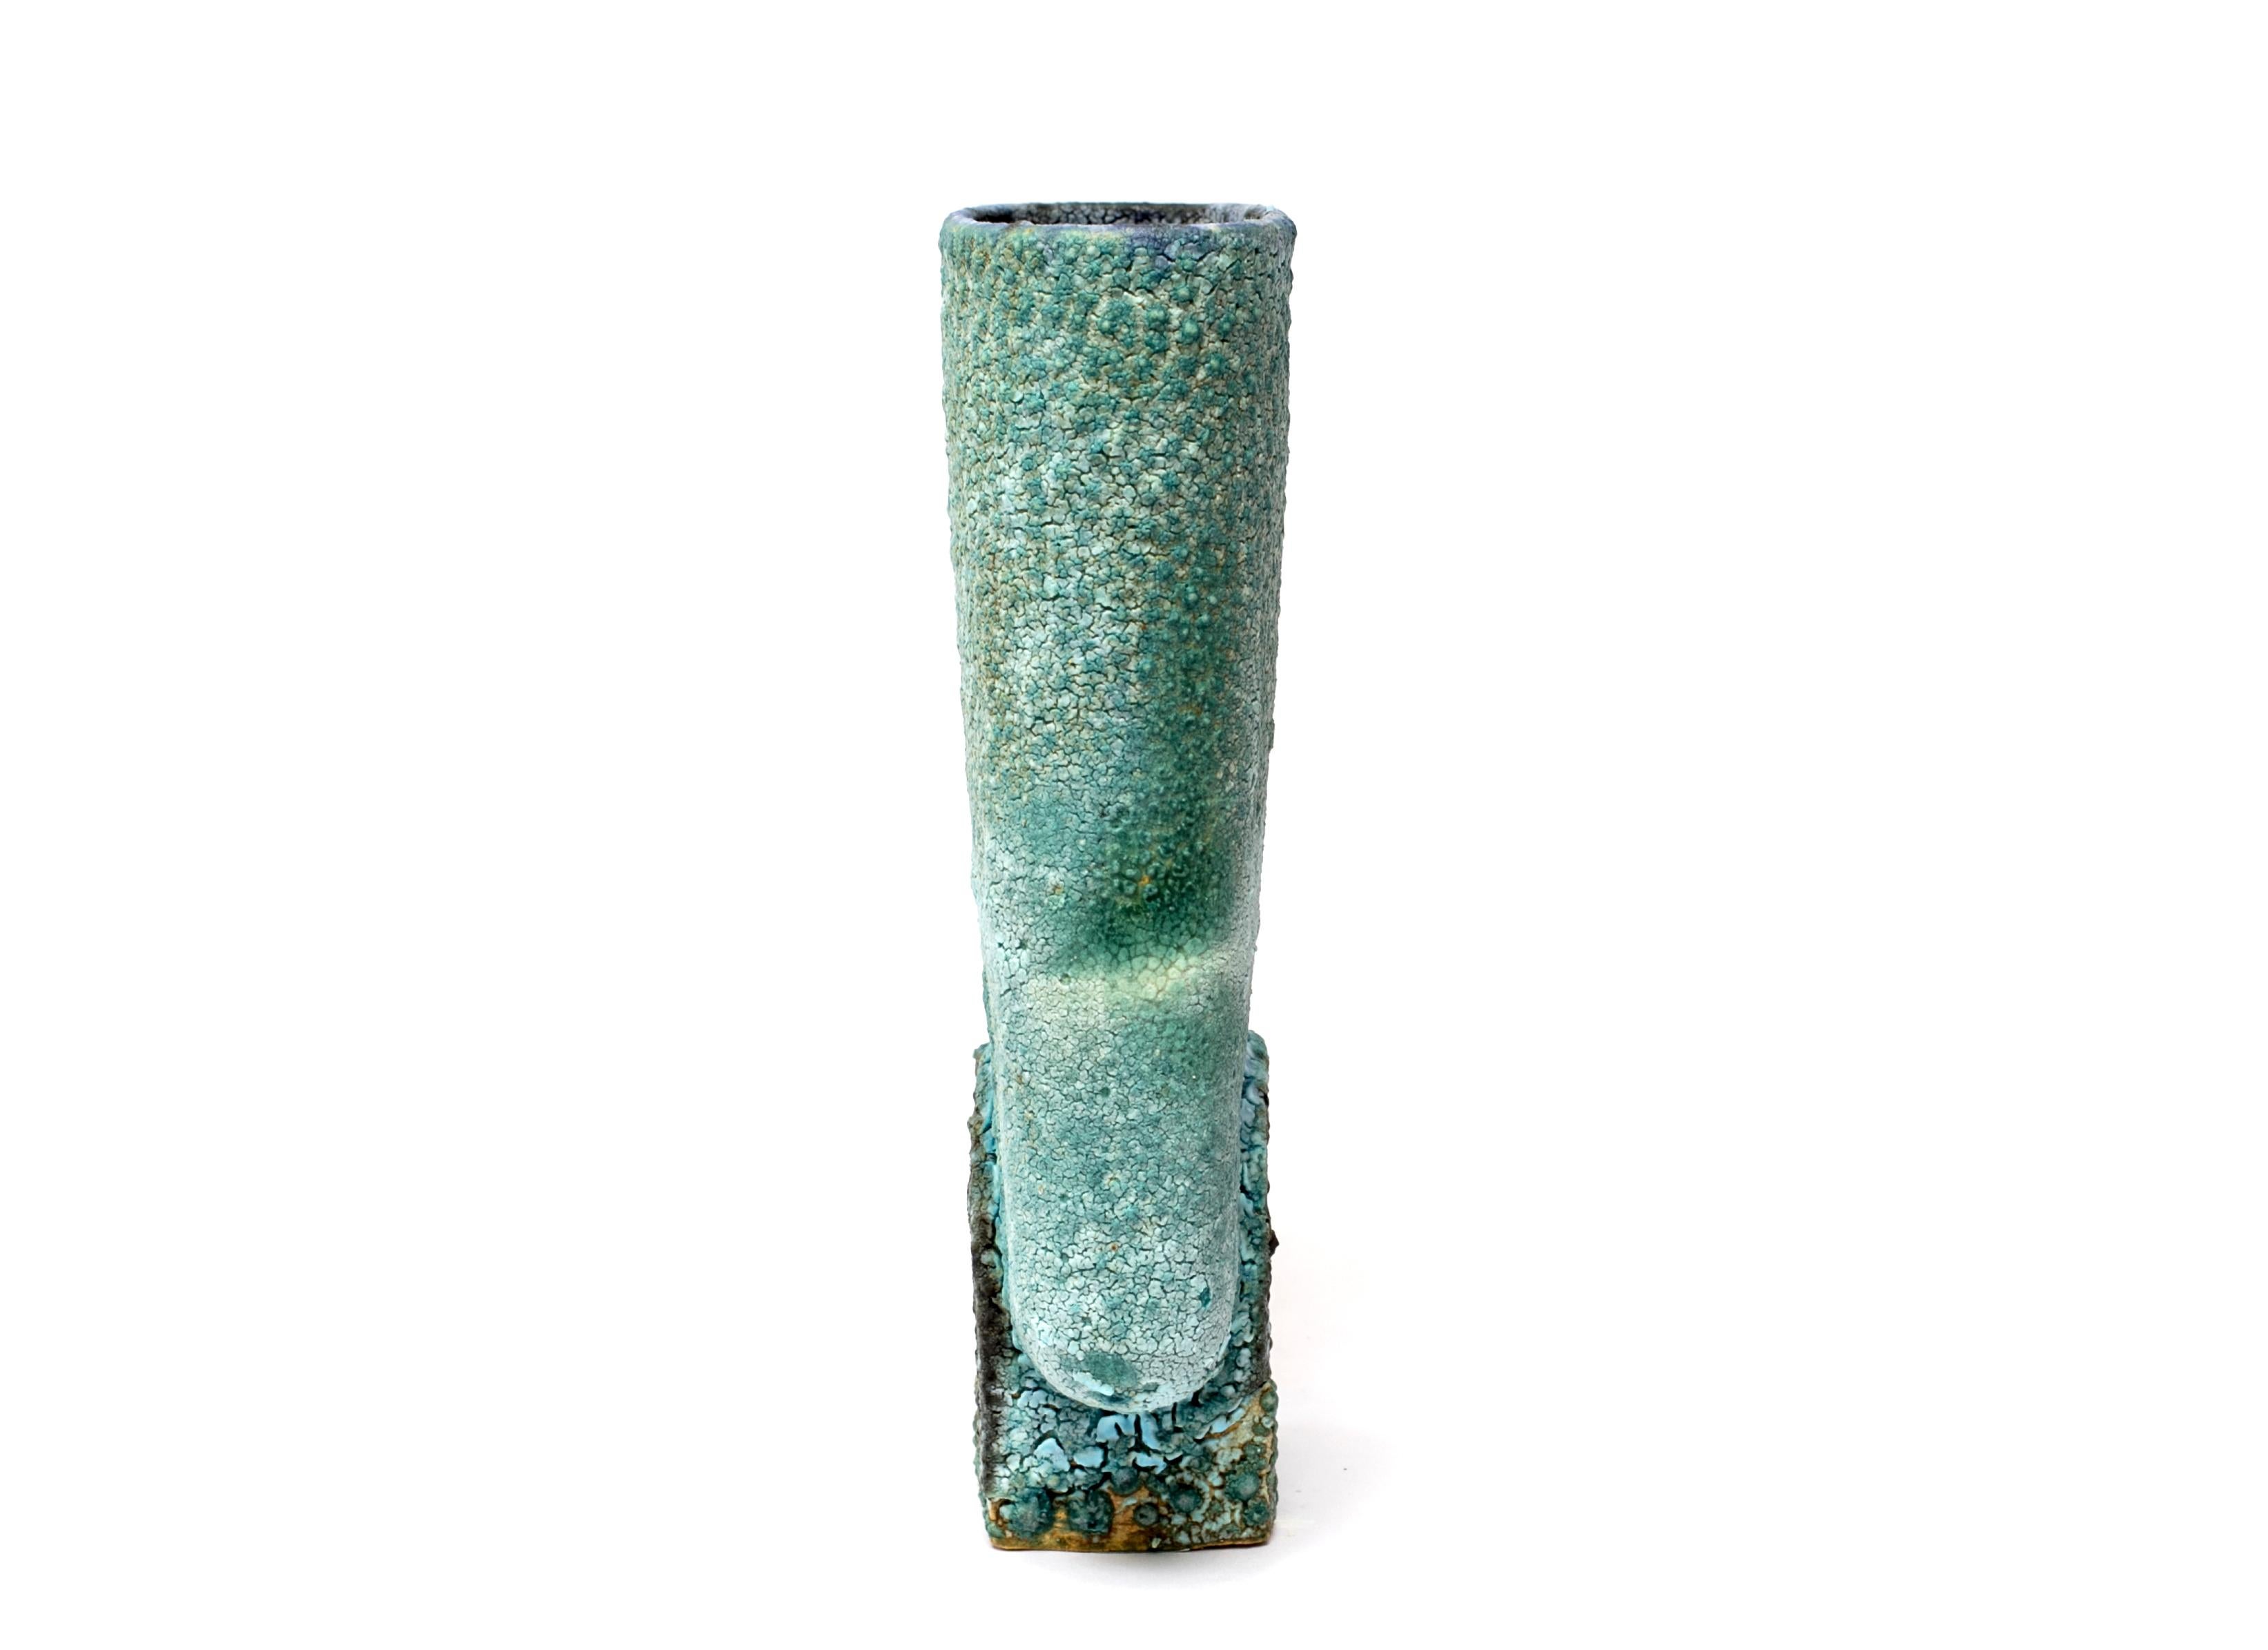 Aaron Poritz

Trophies
Ceramic and glaze, 2018
Small, without wood: approx. 6